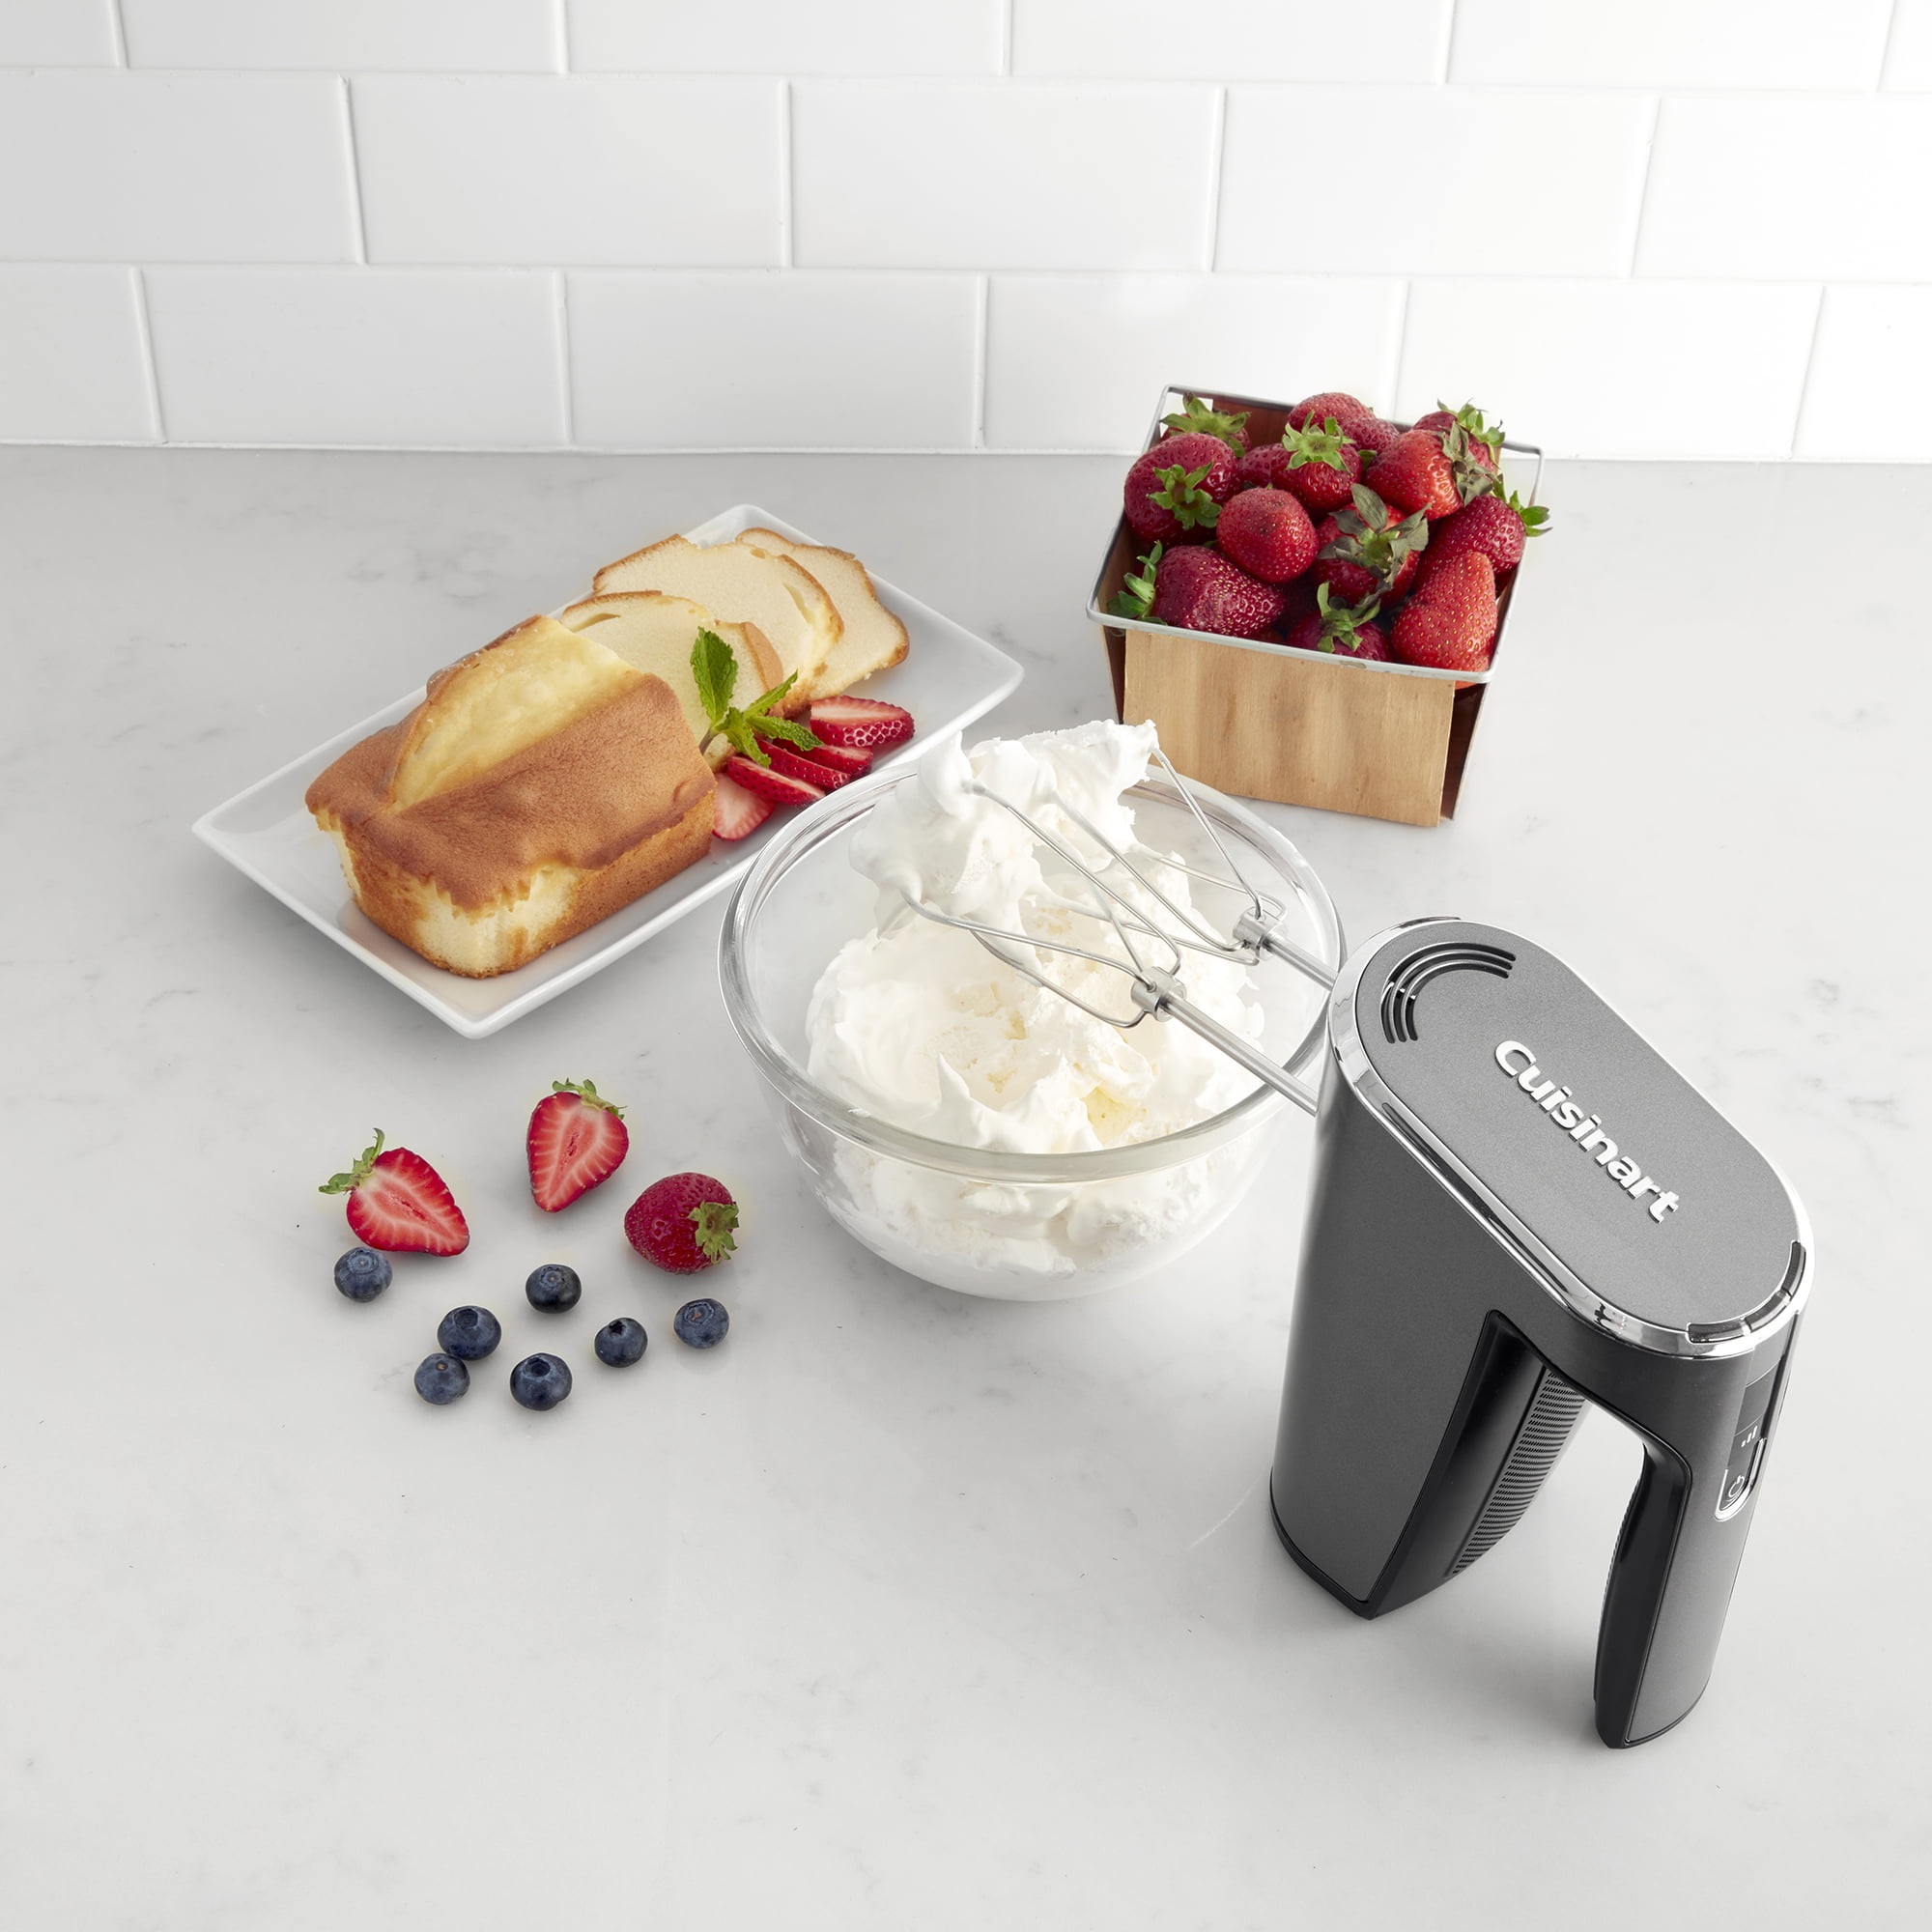  Cuisinart EvolutionX Hand Blender - Cordless Rechargeable  Kitchen Mixer - Versatile 5-Speed Control, Immersion Blending, and Whisking  Bundle with Handheld Milk Frother (2 Items): Home & Kitchen